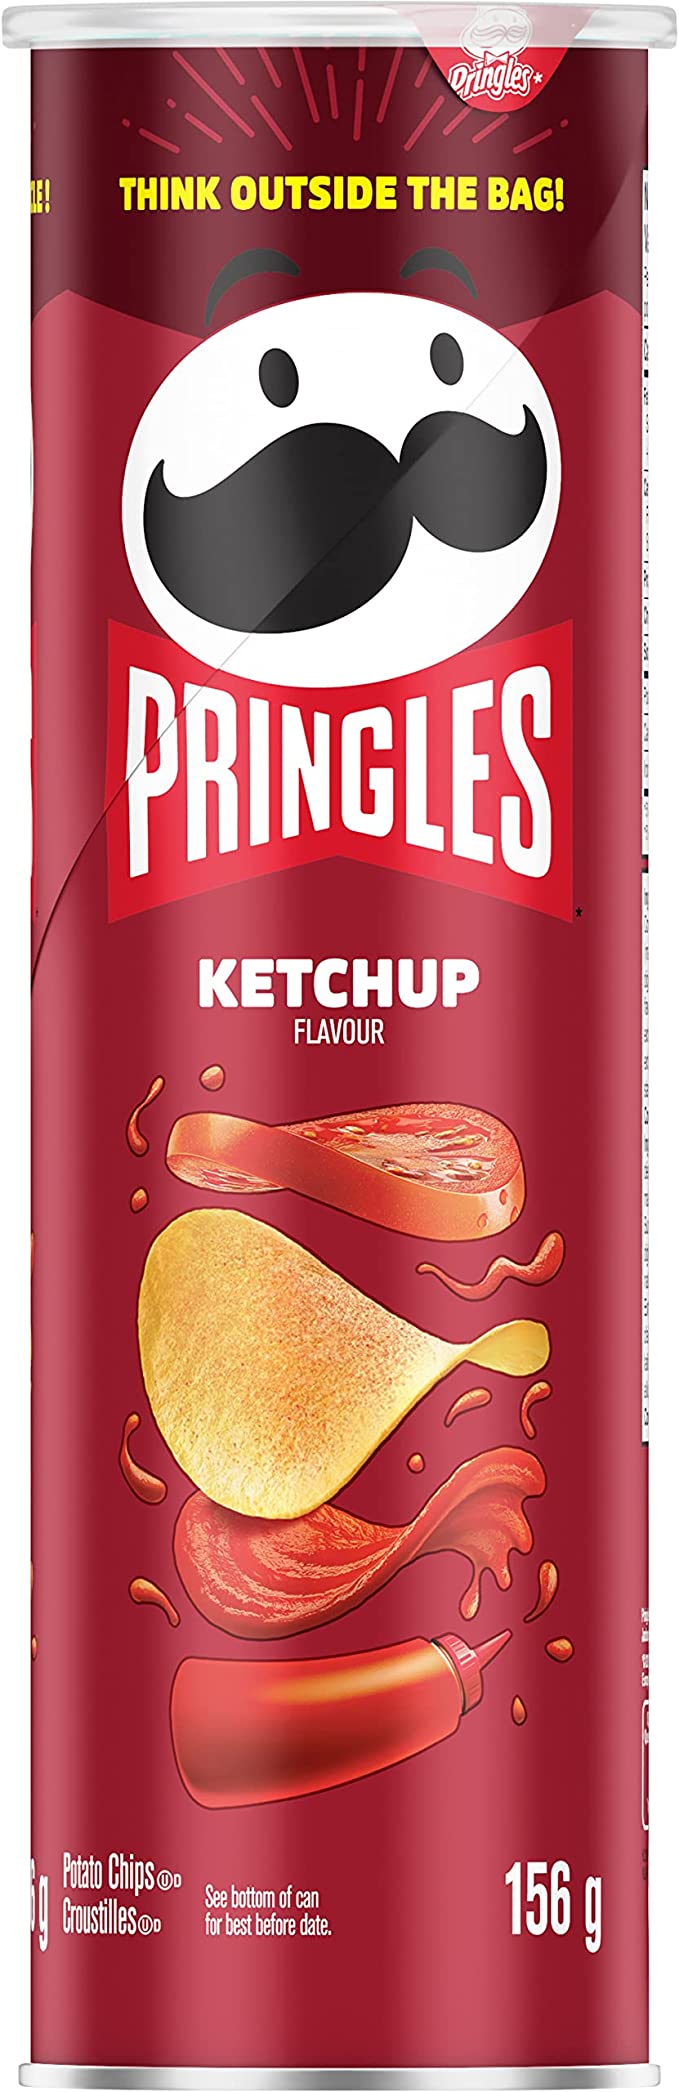 Pringles Ketchup Flavour 156g